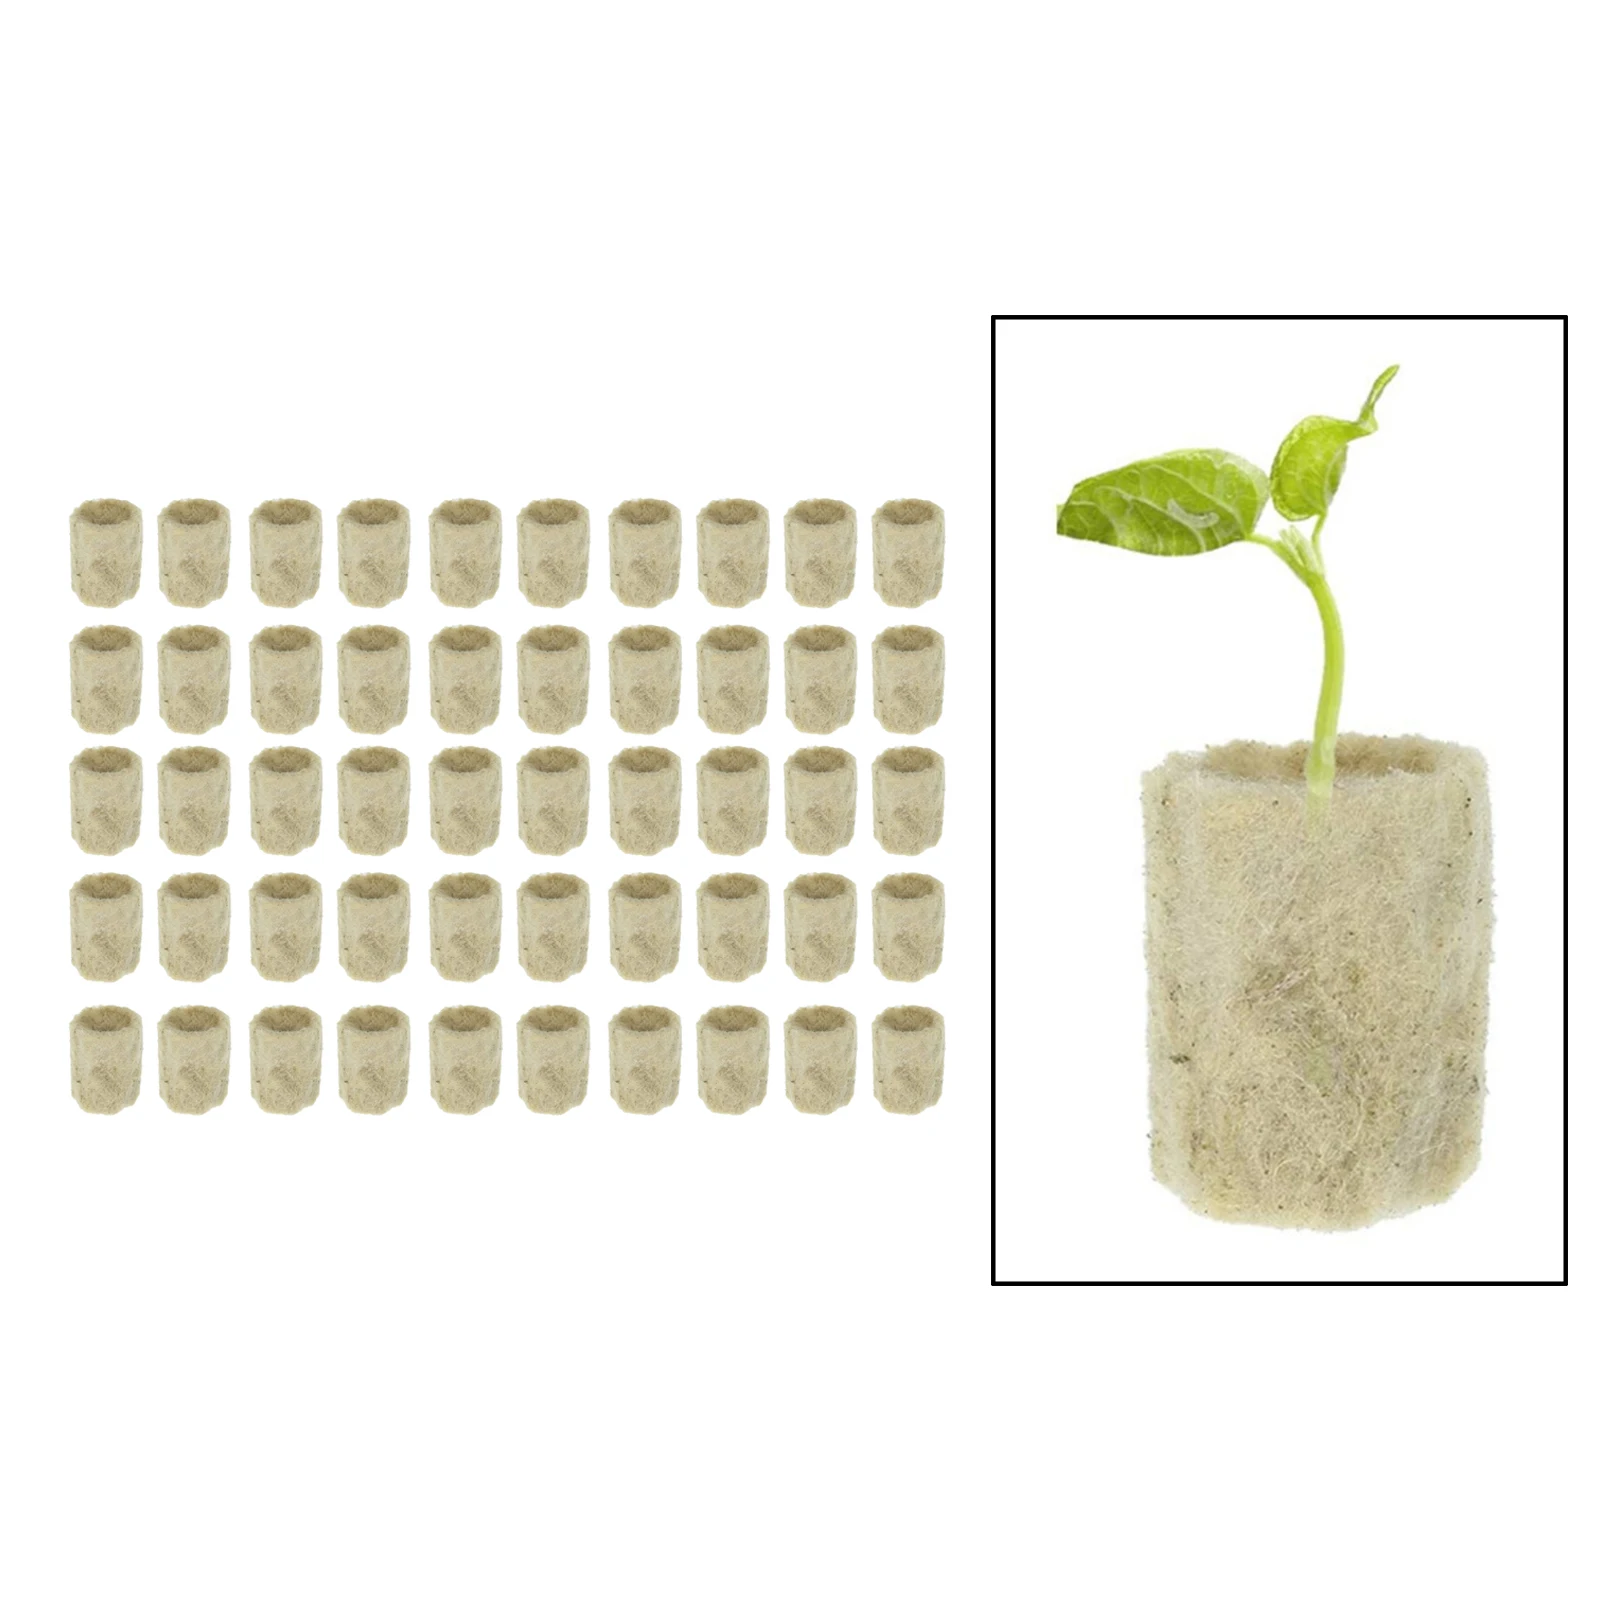  Blocks, 50 Pcs Gardening  Hydroponics Cubes Tray, for Outdoor  Planting Seedling 